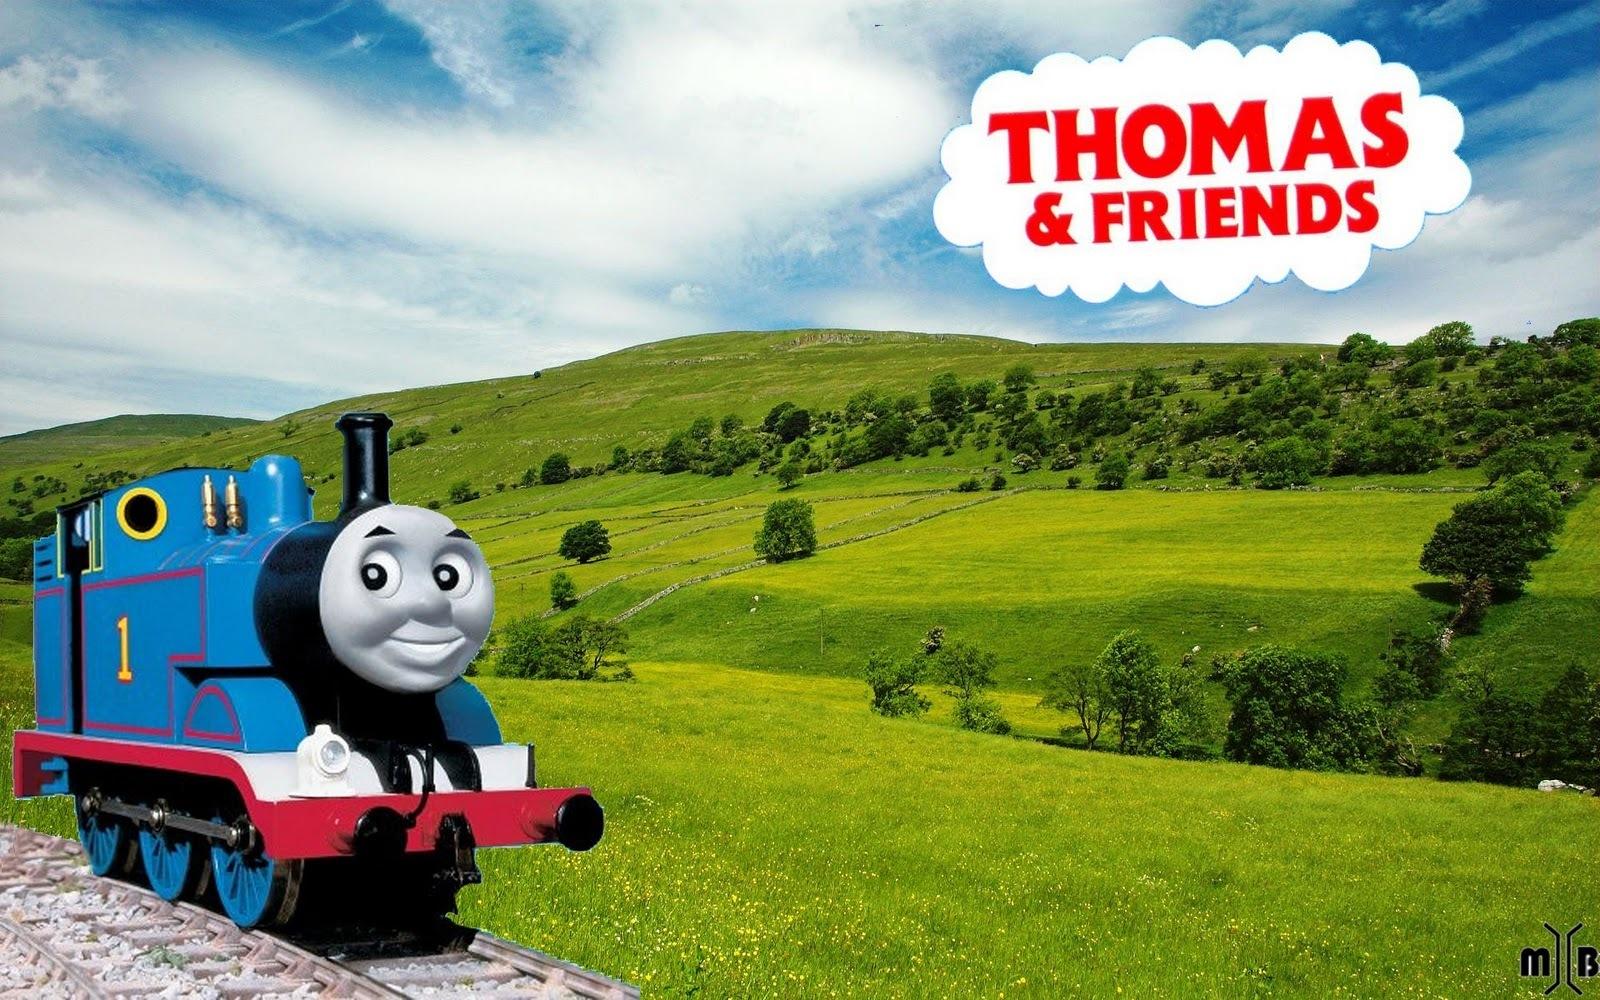 Thomas & Friends Wallpapers - Wallpaper Cave